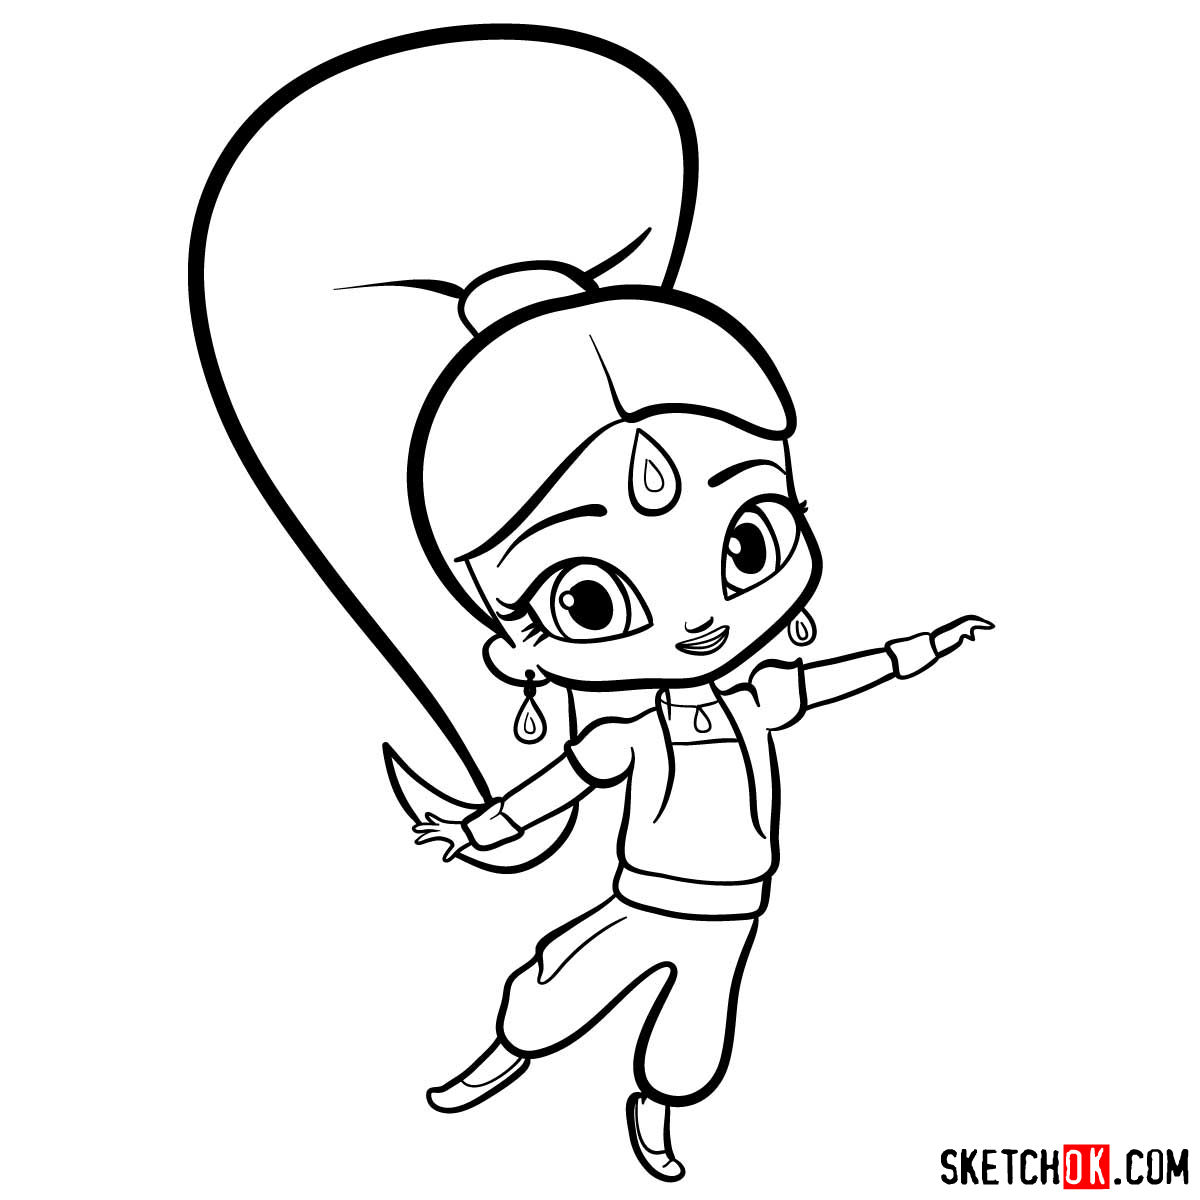 How to draw Shimmer from Shimmer and Shine